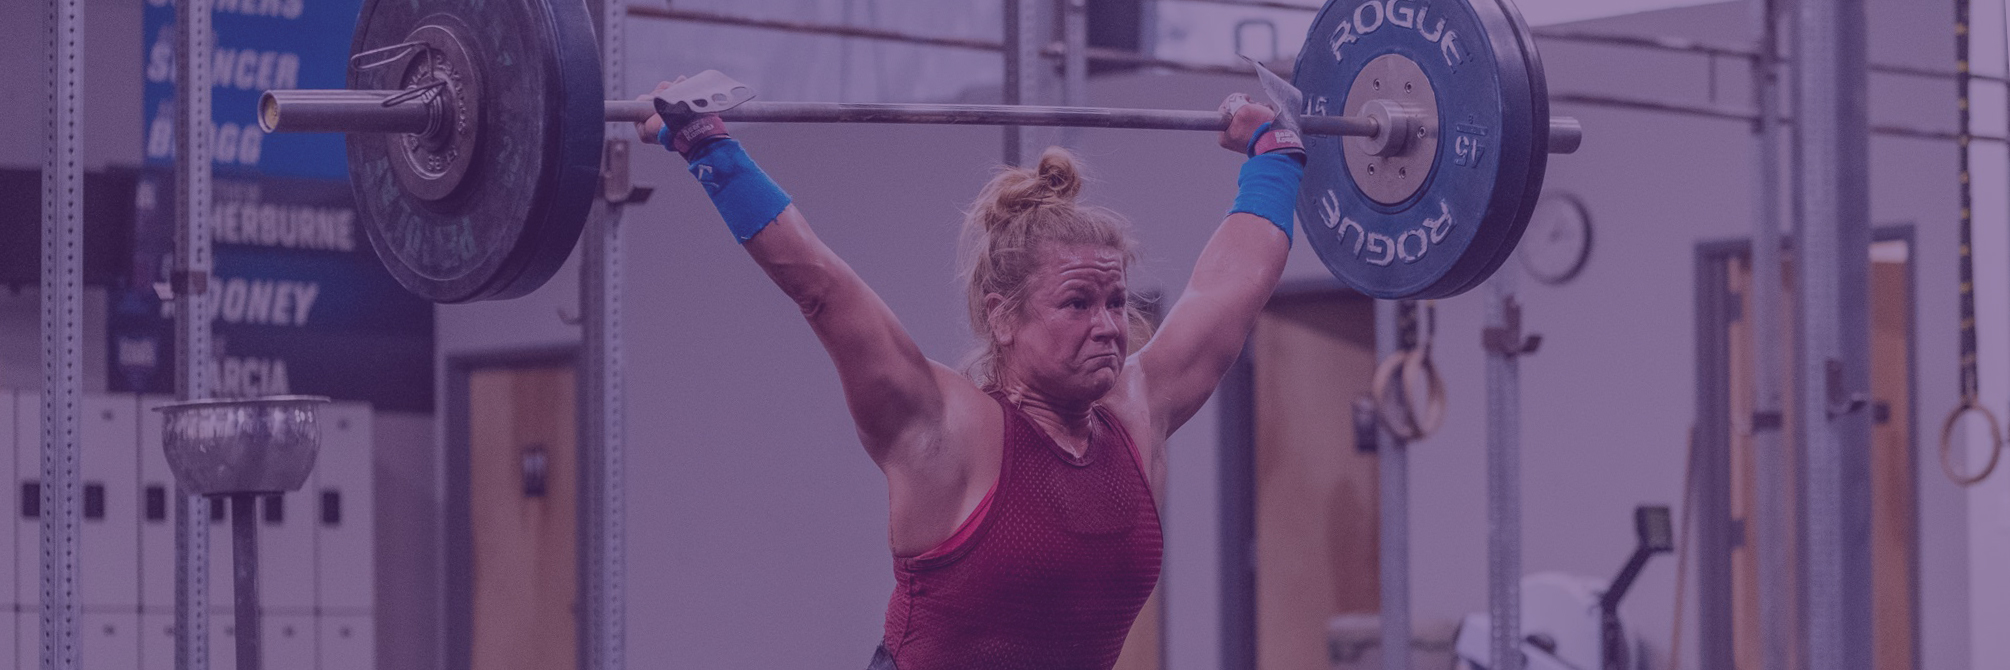 Are You Strong Enough to go to the Crossfit Games? - Misfit Athletics